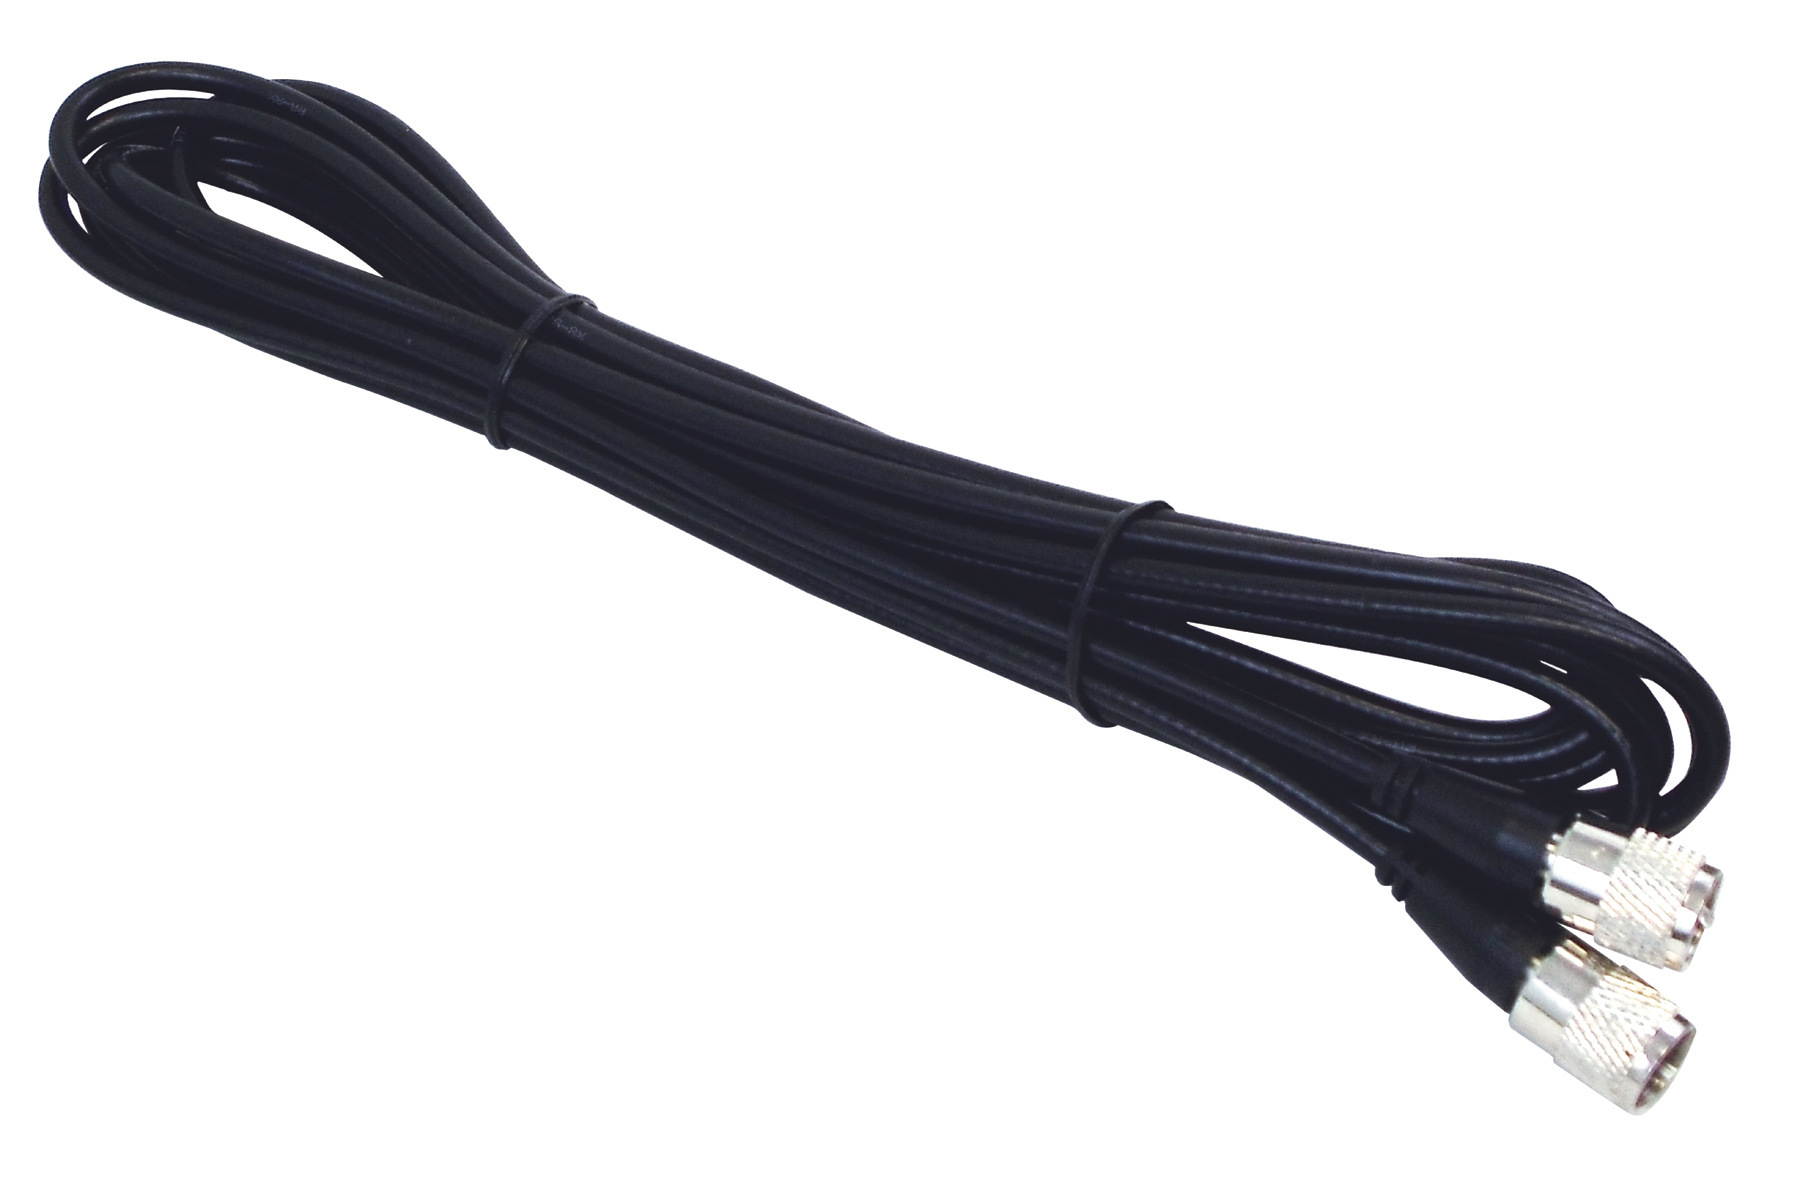 Kalibur 18 Foot Black Rg8X Coax Cable Assembly With Molded Pl259 Connectors On Each End